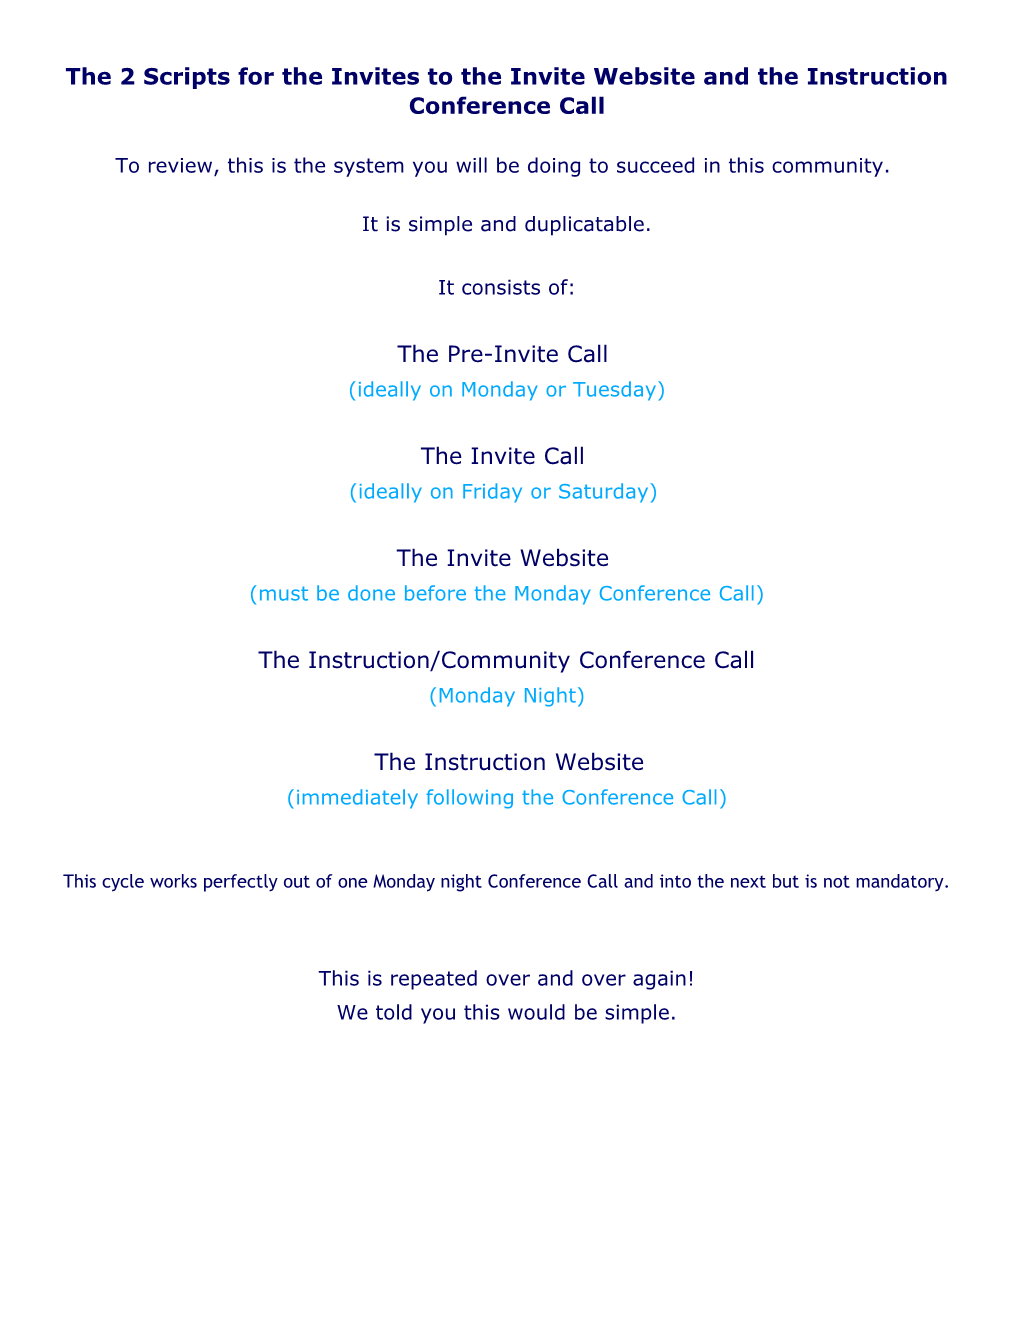 The 2 Scripts for the Invites to the Invite Website and the Instruction Conference Call